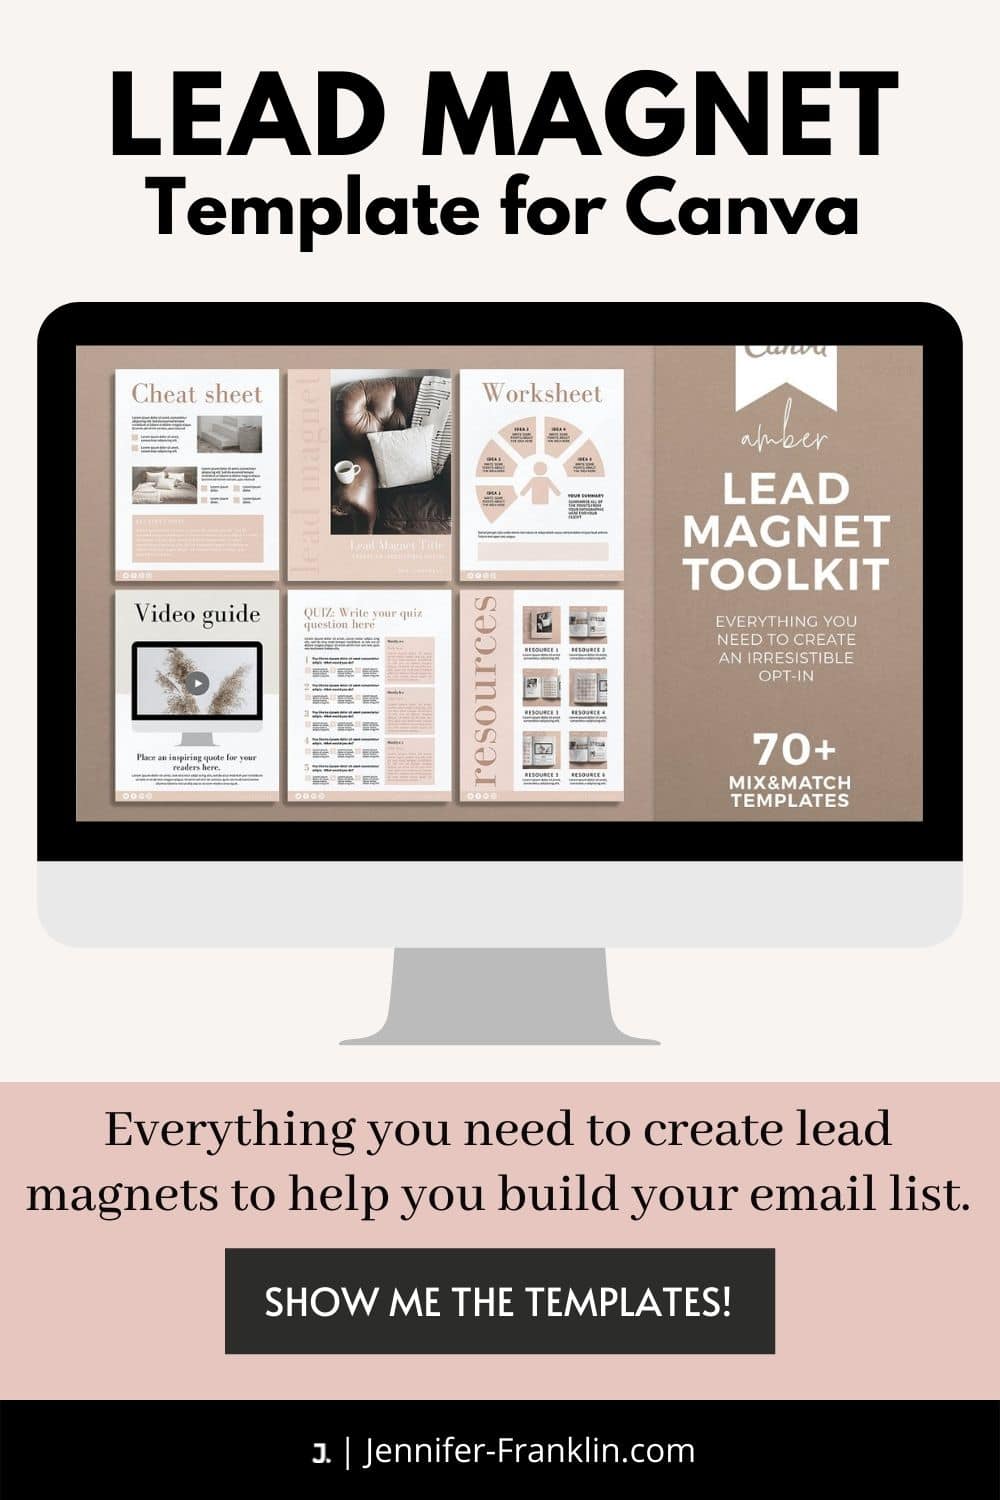 Lead Magnet Template for Canva